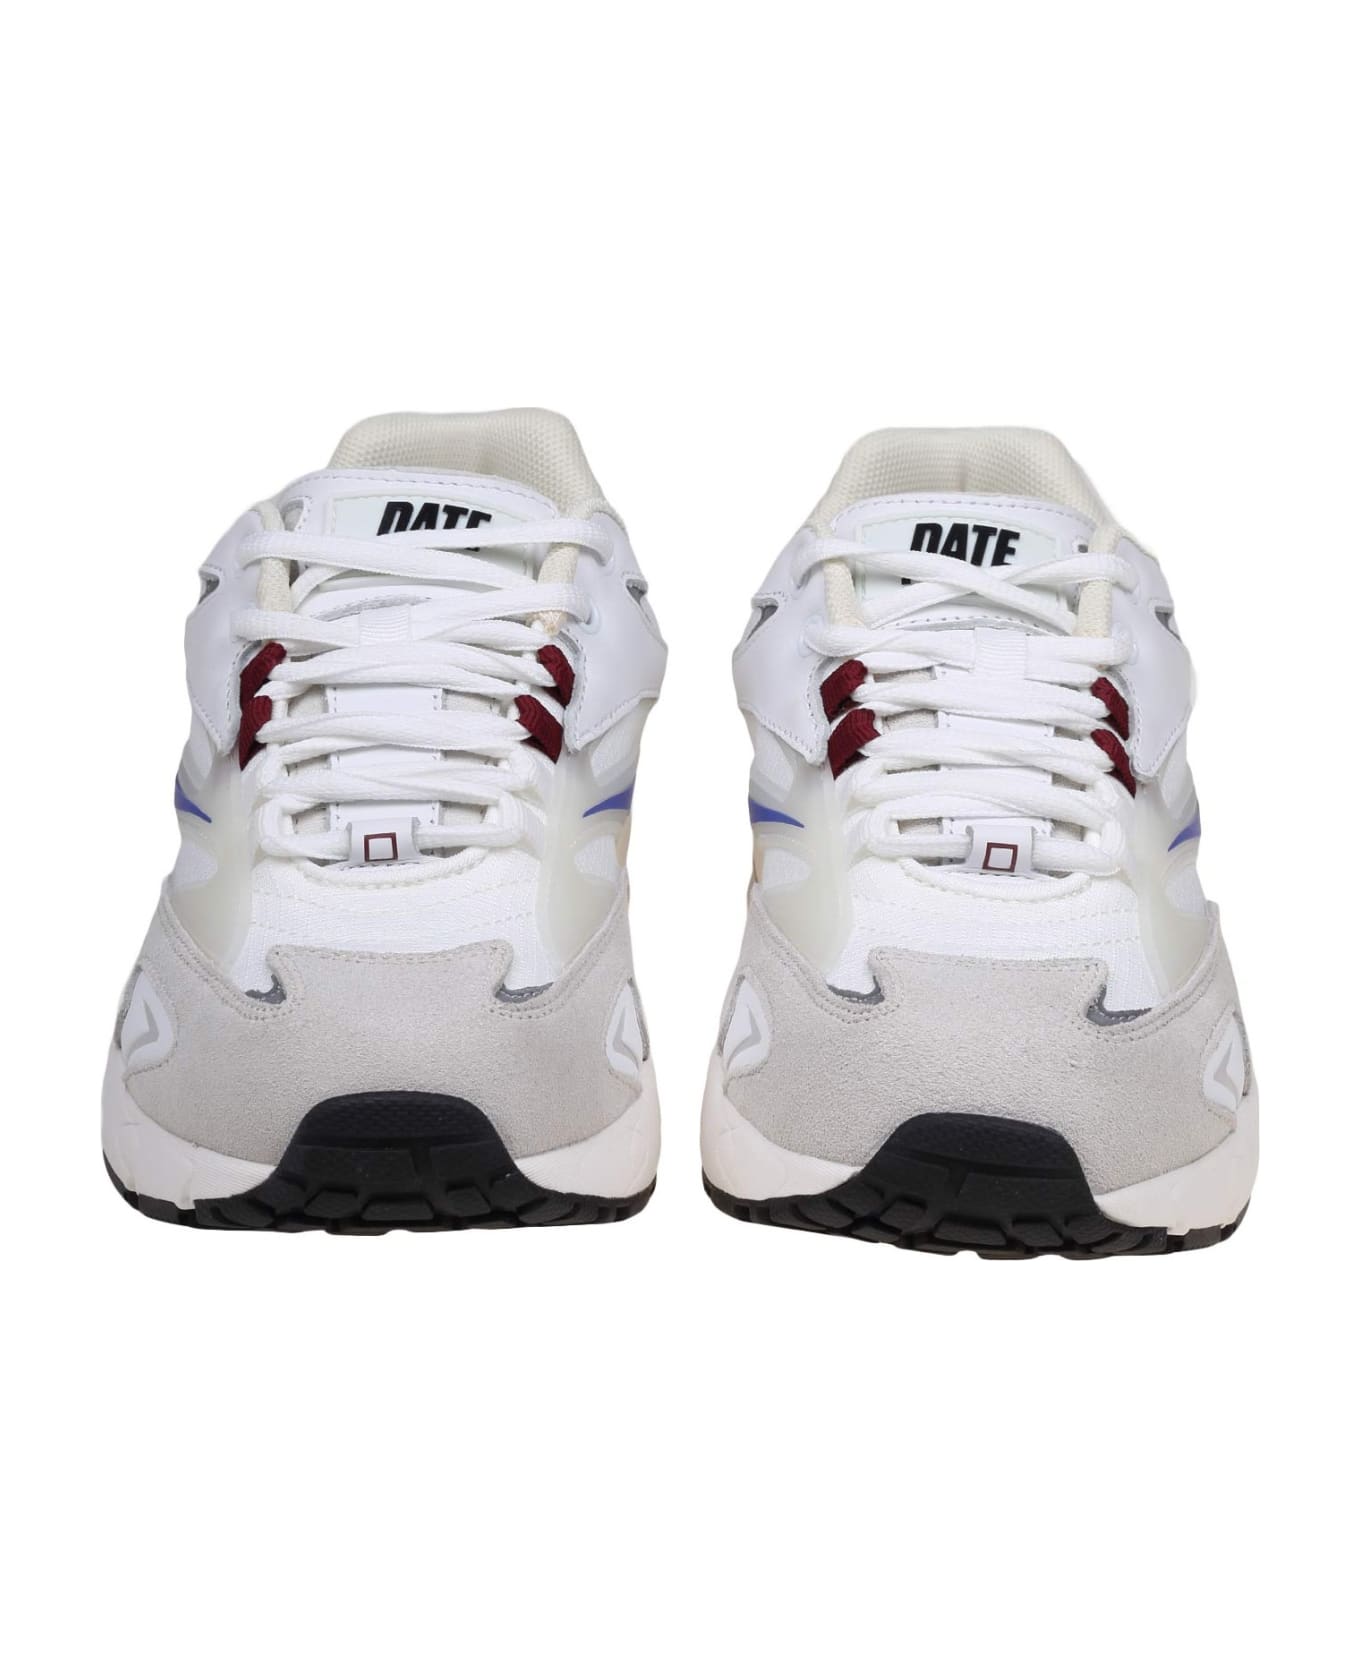 D.A.T.E. Sn23 Sneakers In White Mesh And Leather - White スニーカー